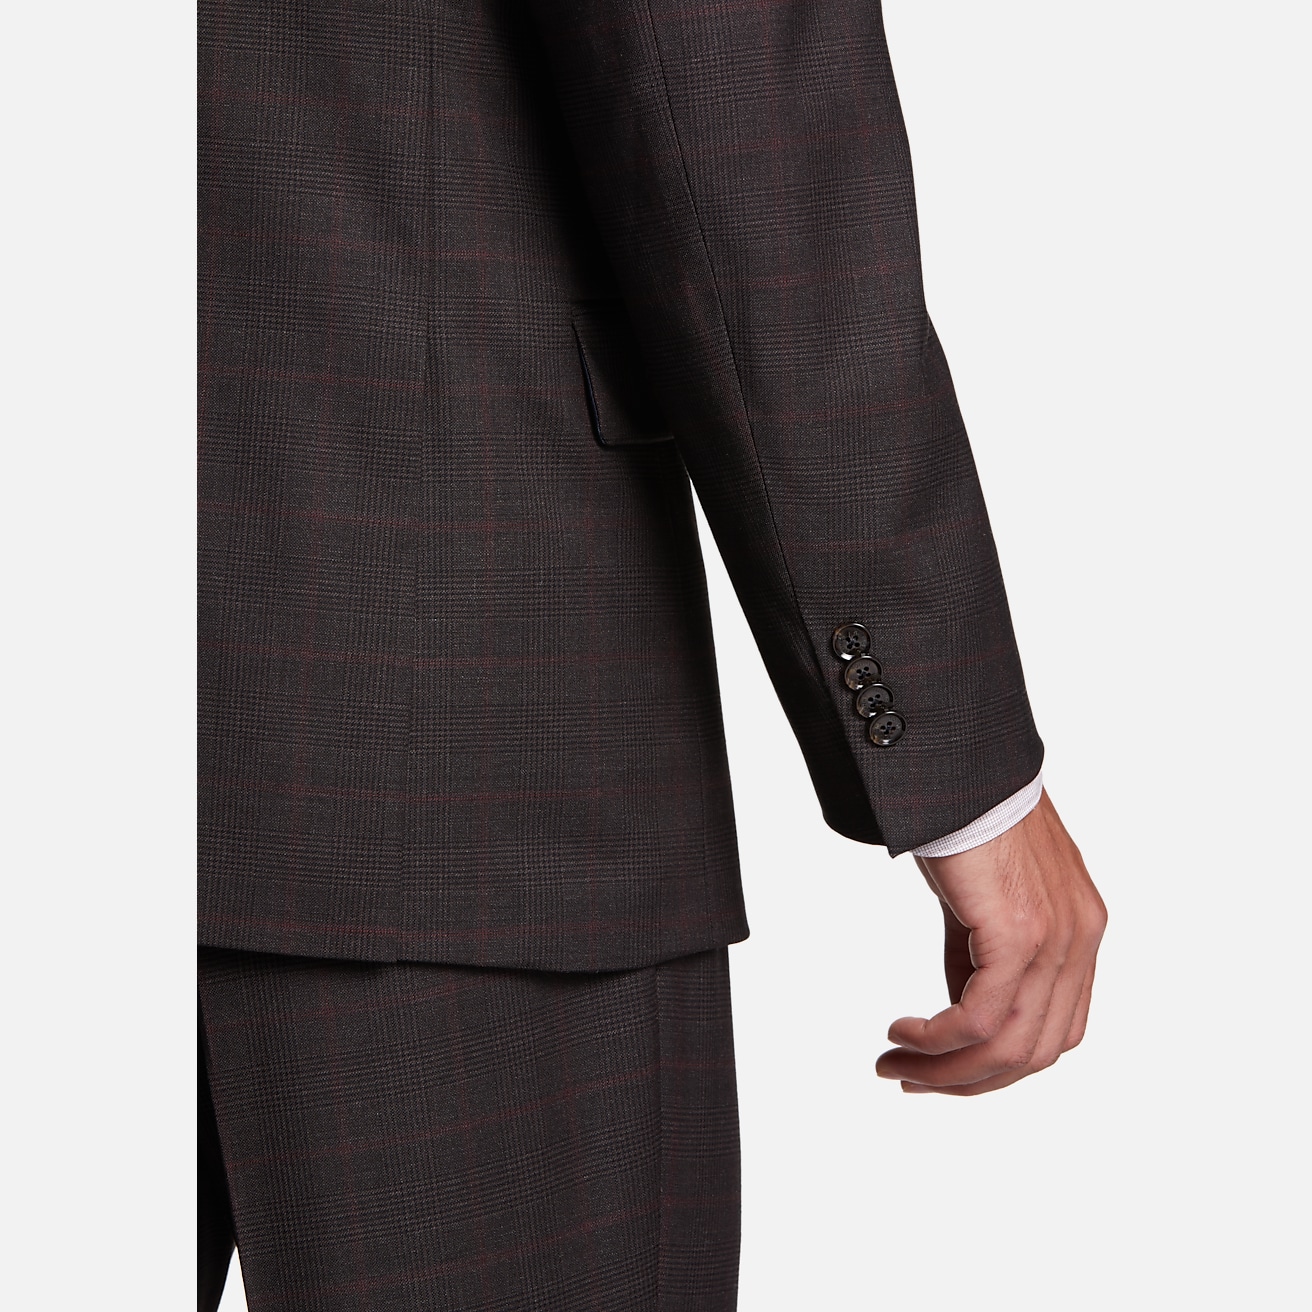 Add This Tommy Hilfiger Suit to Your Collection Right Now - Men's